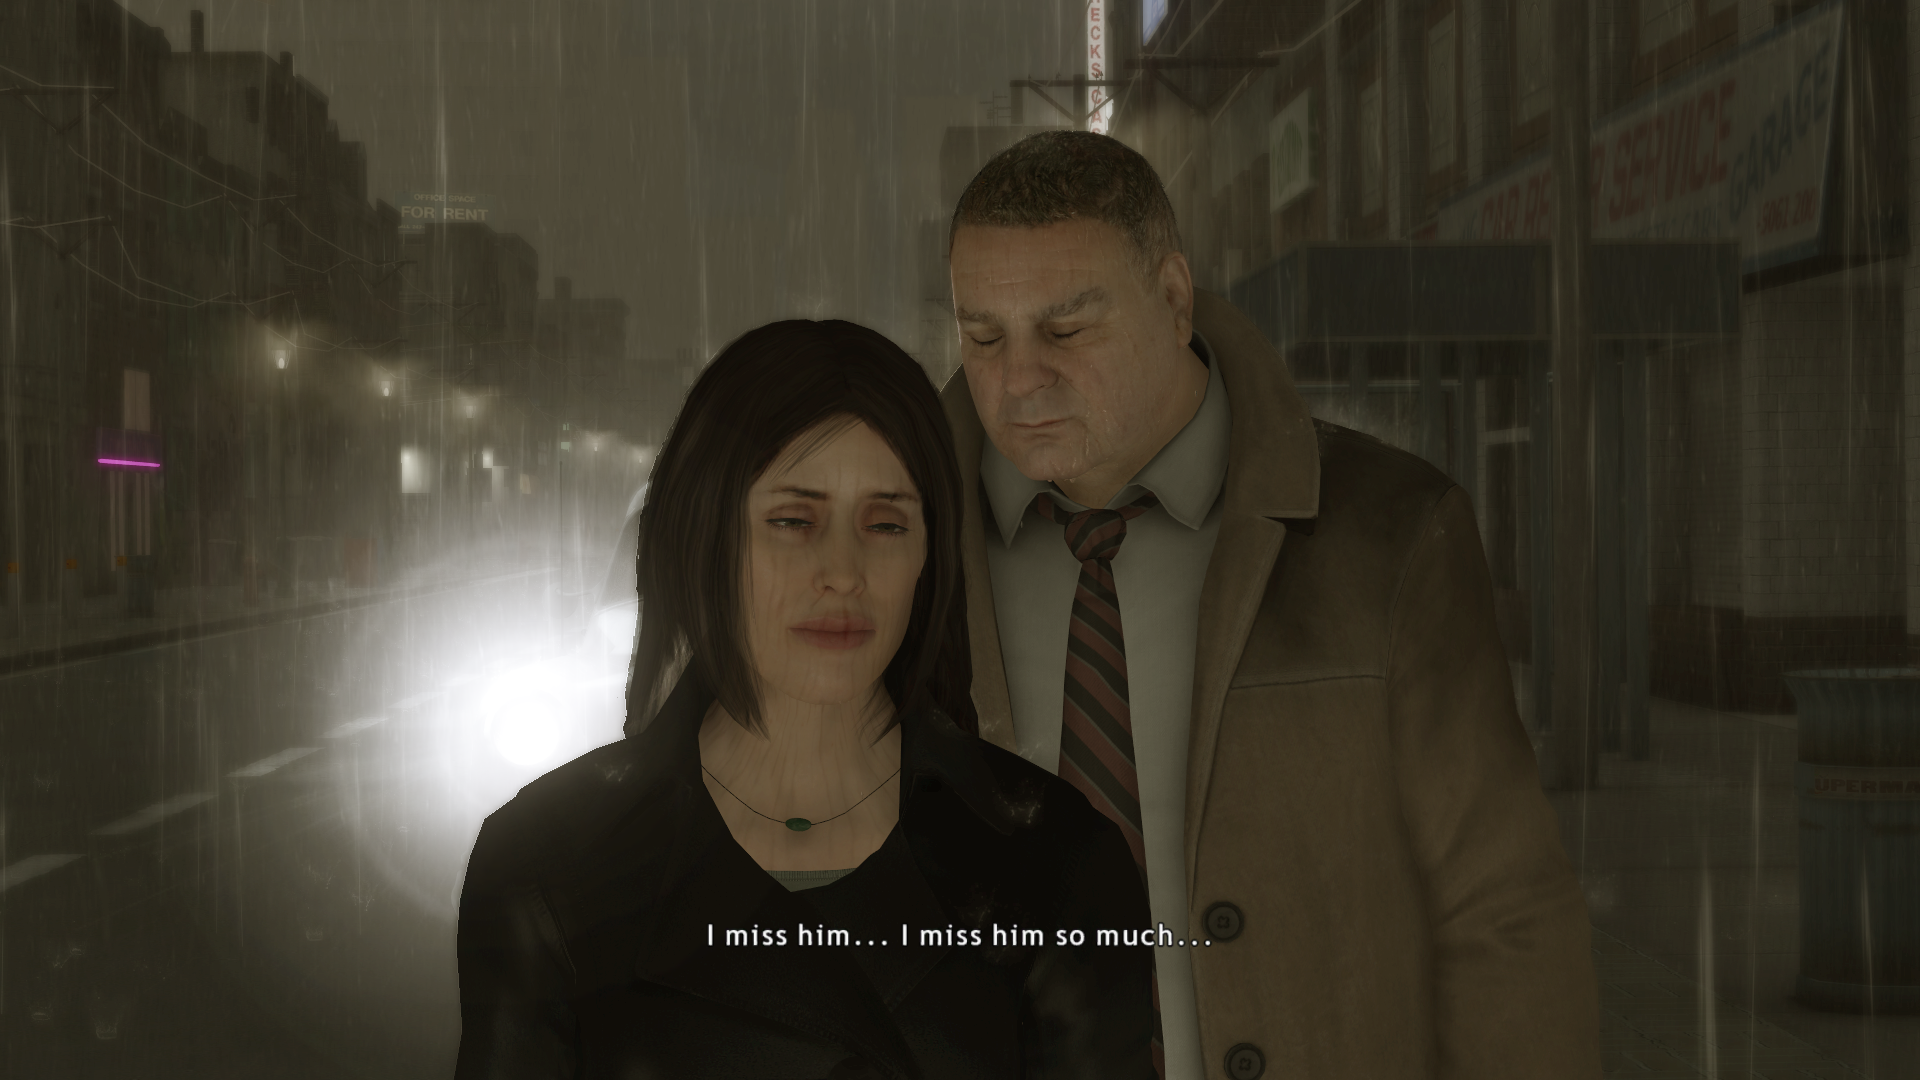 Heavy Rain (PS4): COMPLETED!